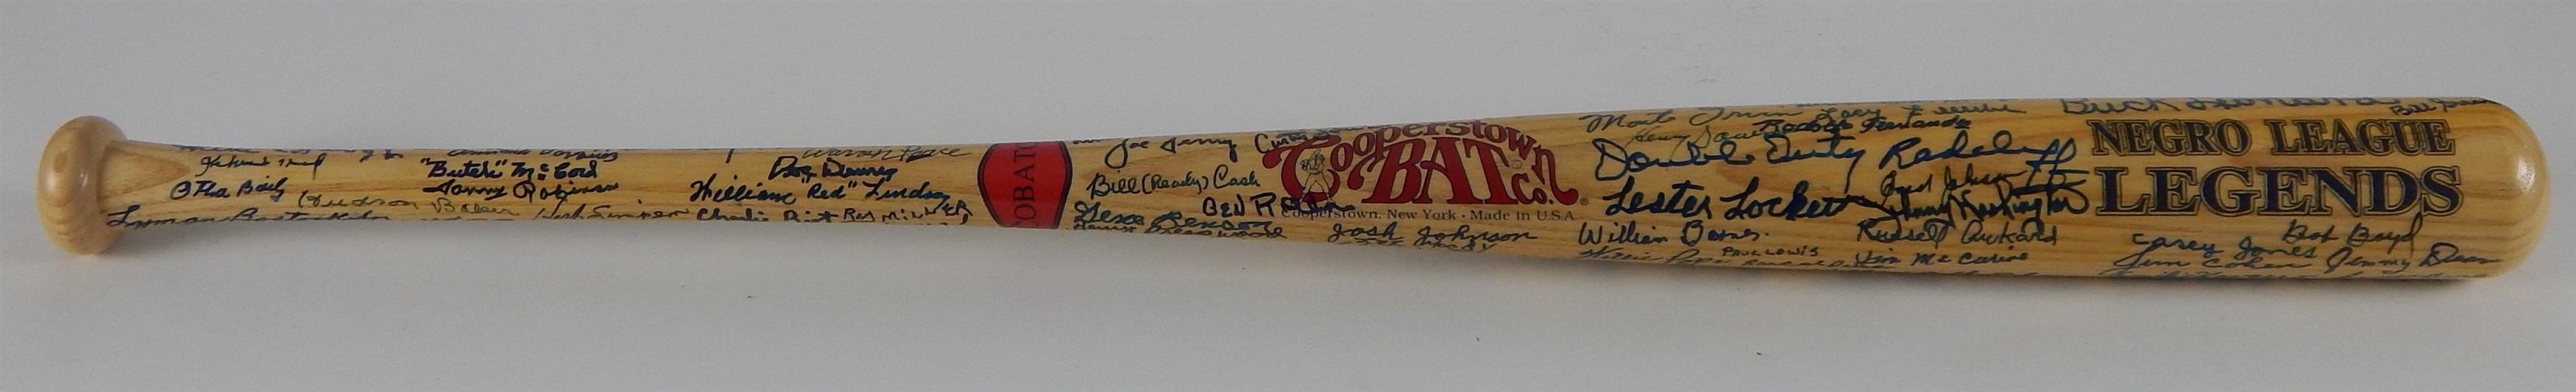 Negro League Legends Cooperstown Signature Bat Covered in Autographs!